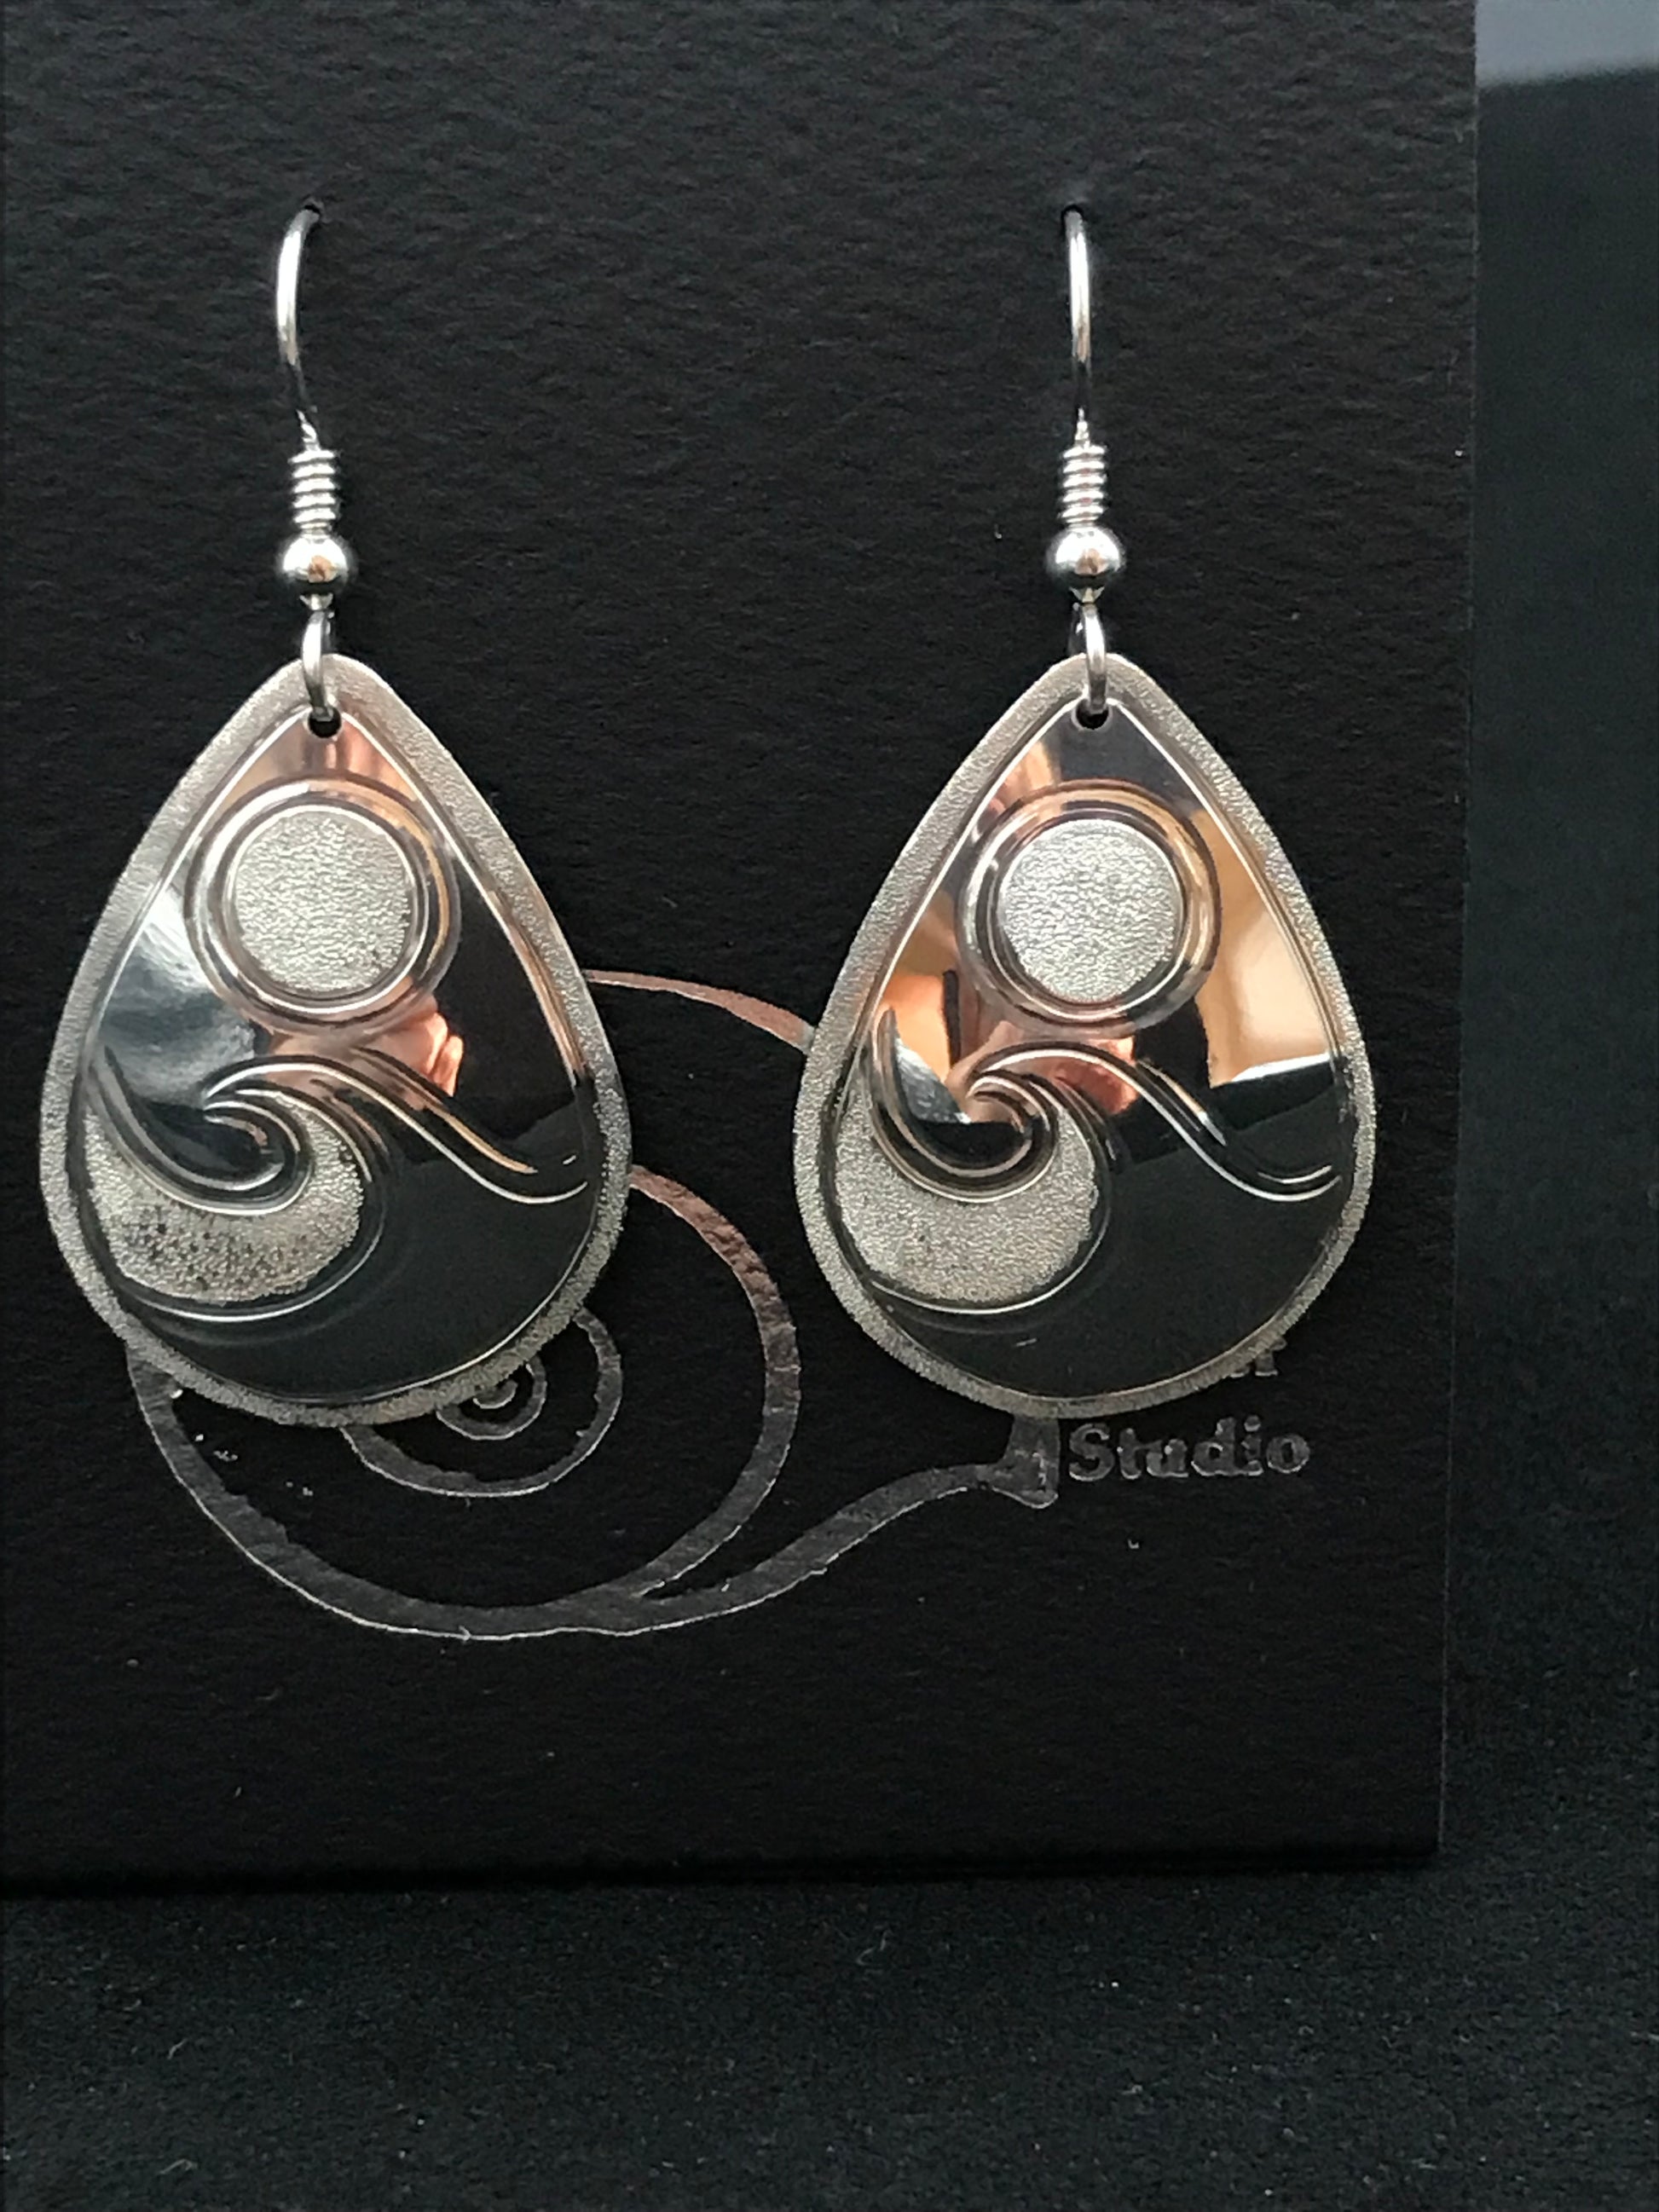 Full Moon & Waves xlarge sterling silver xlarge drops by Laura Dutheil.